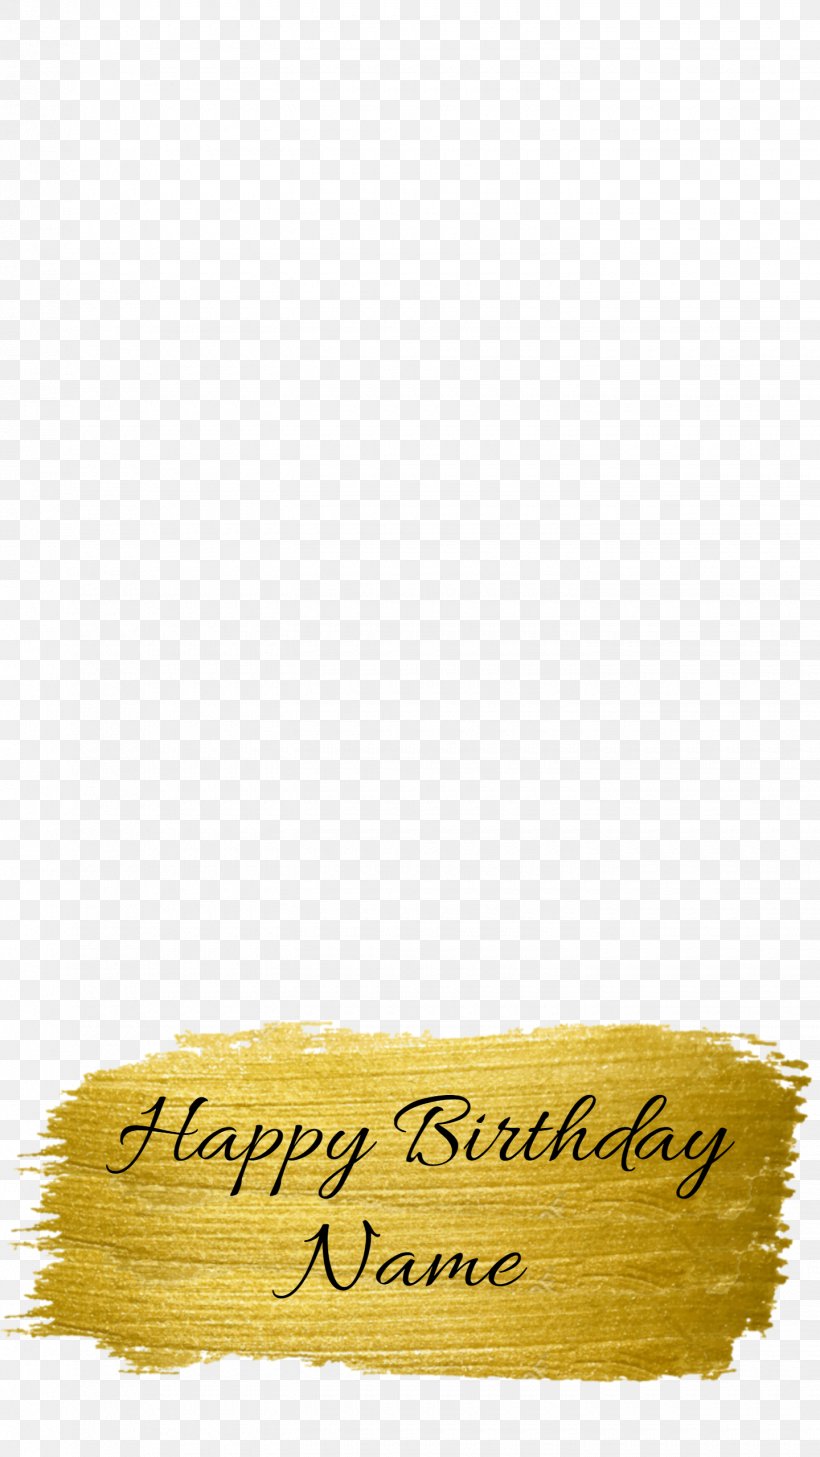 Birthday Gift Wrapping Paper Gold, PNG, 1440x2560px, Birthday, Gift, Gift Wrapping, Gold, Paint Download Free